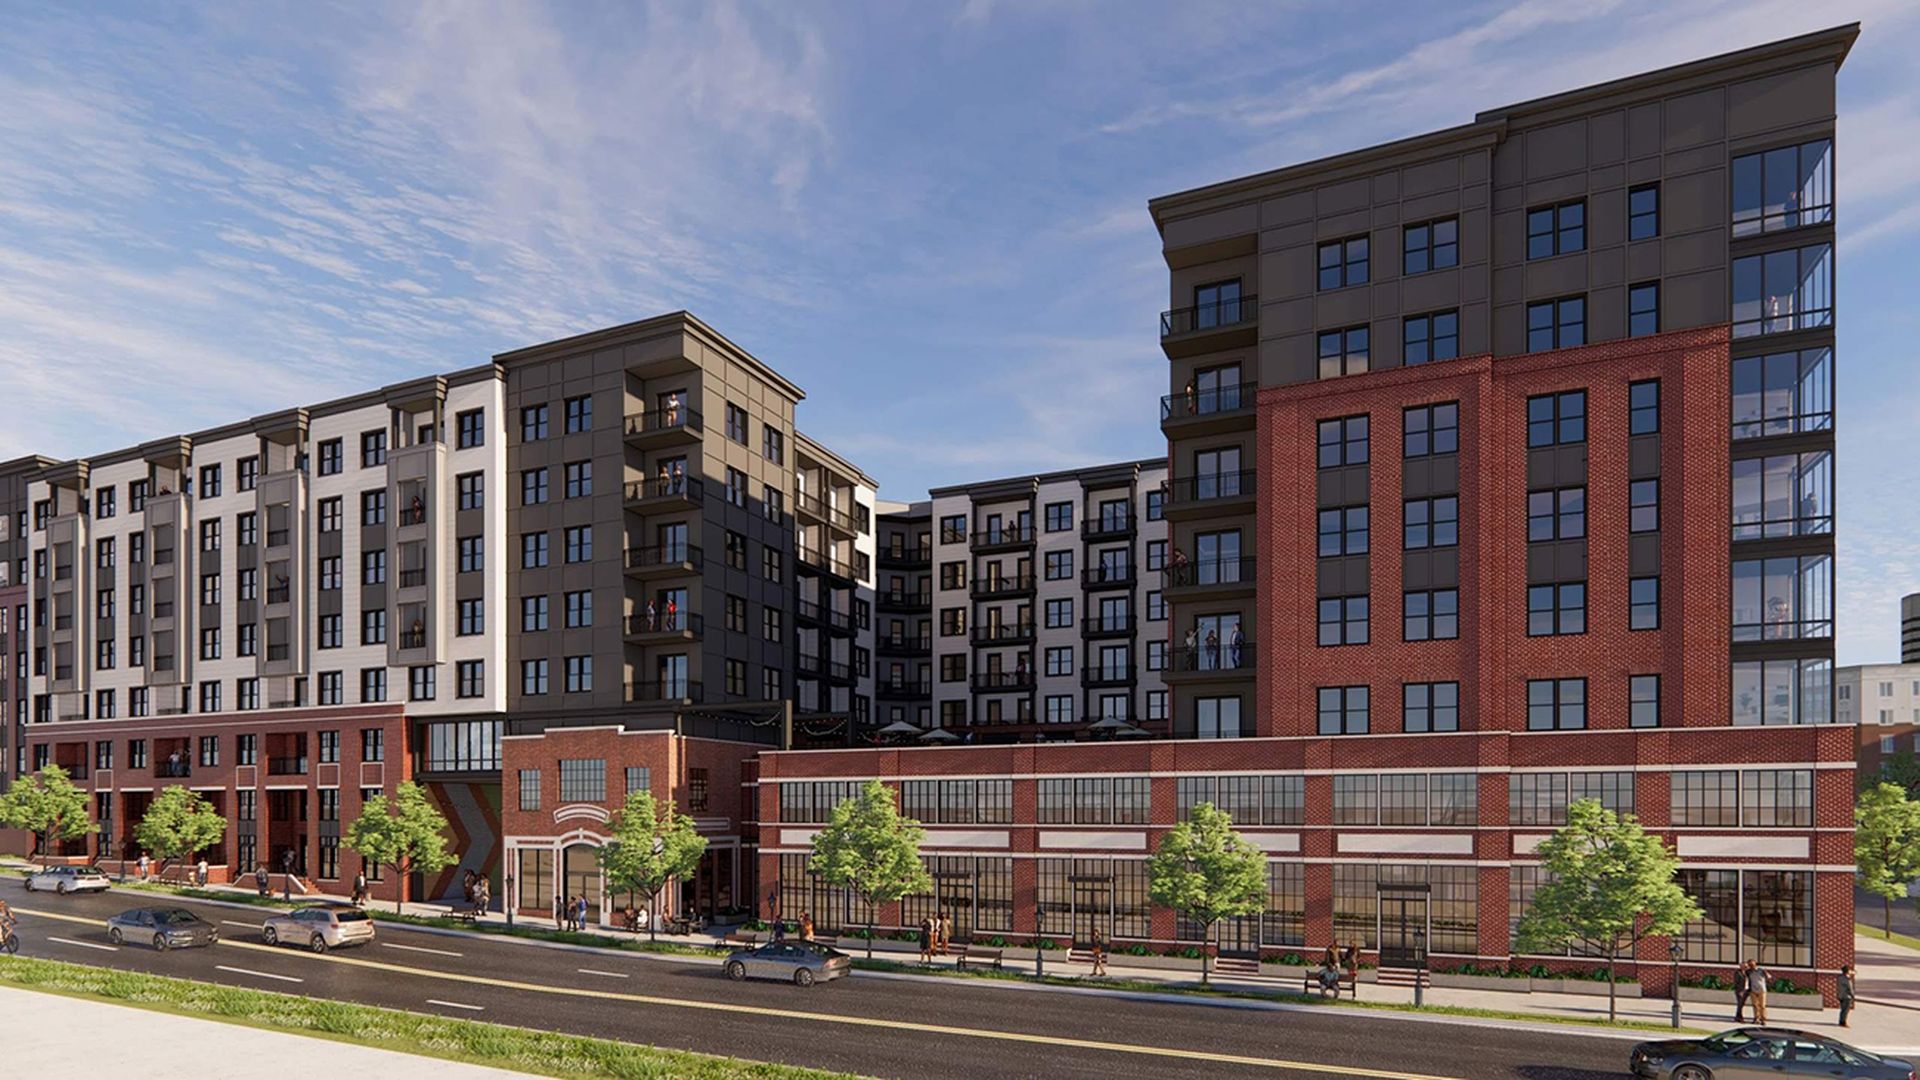 rendering of new multi-use development around the old Fourth Ward Bread Co.